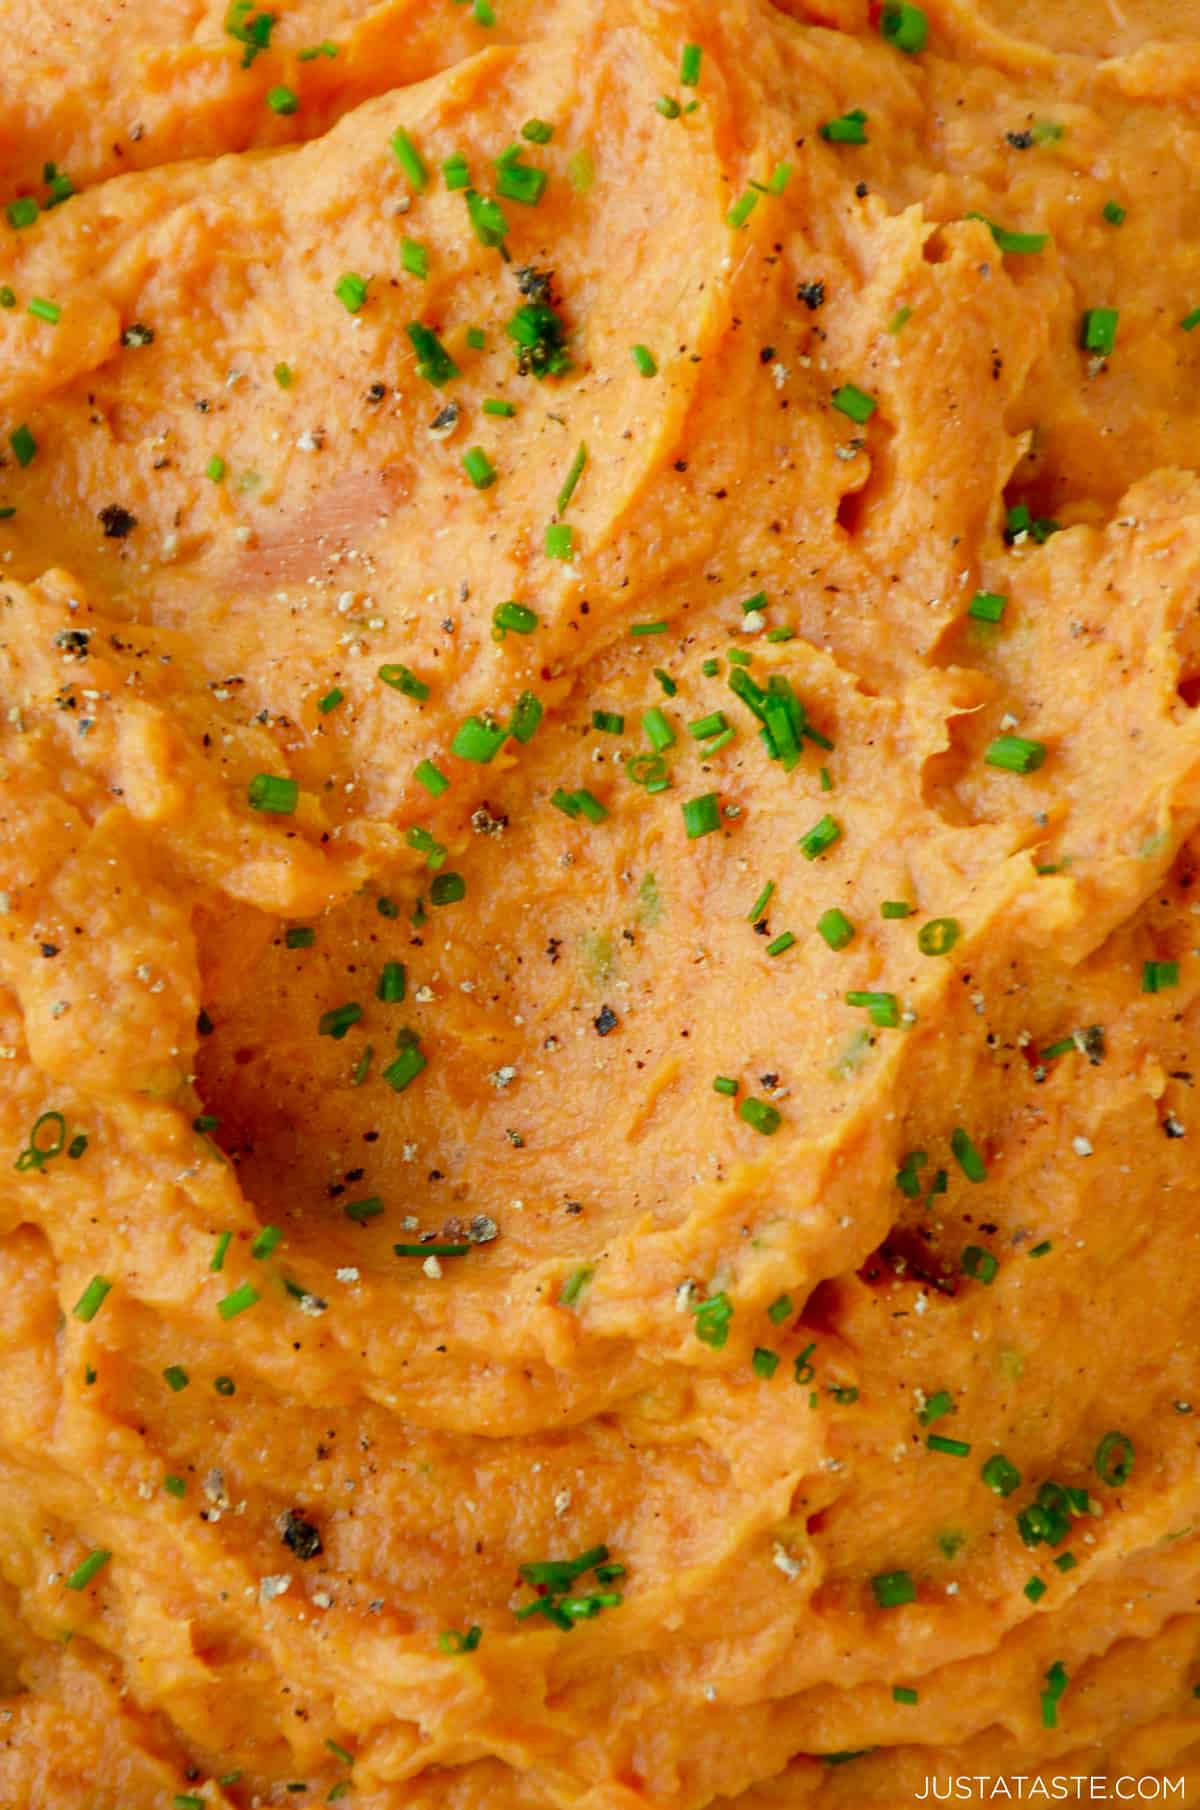 Mashed sweet potatoes garnished with fresh chives, salt and pepper.